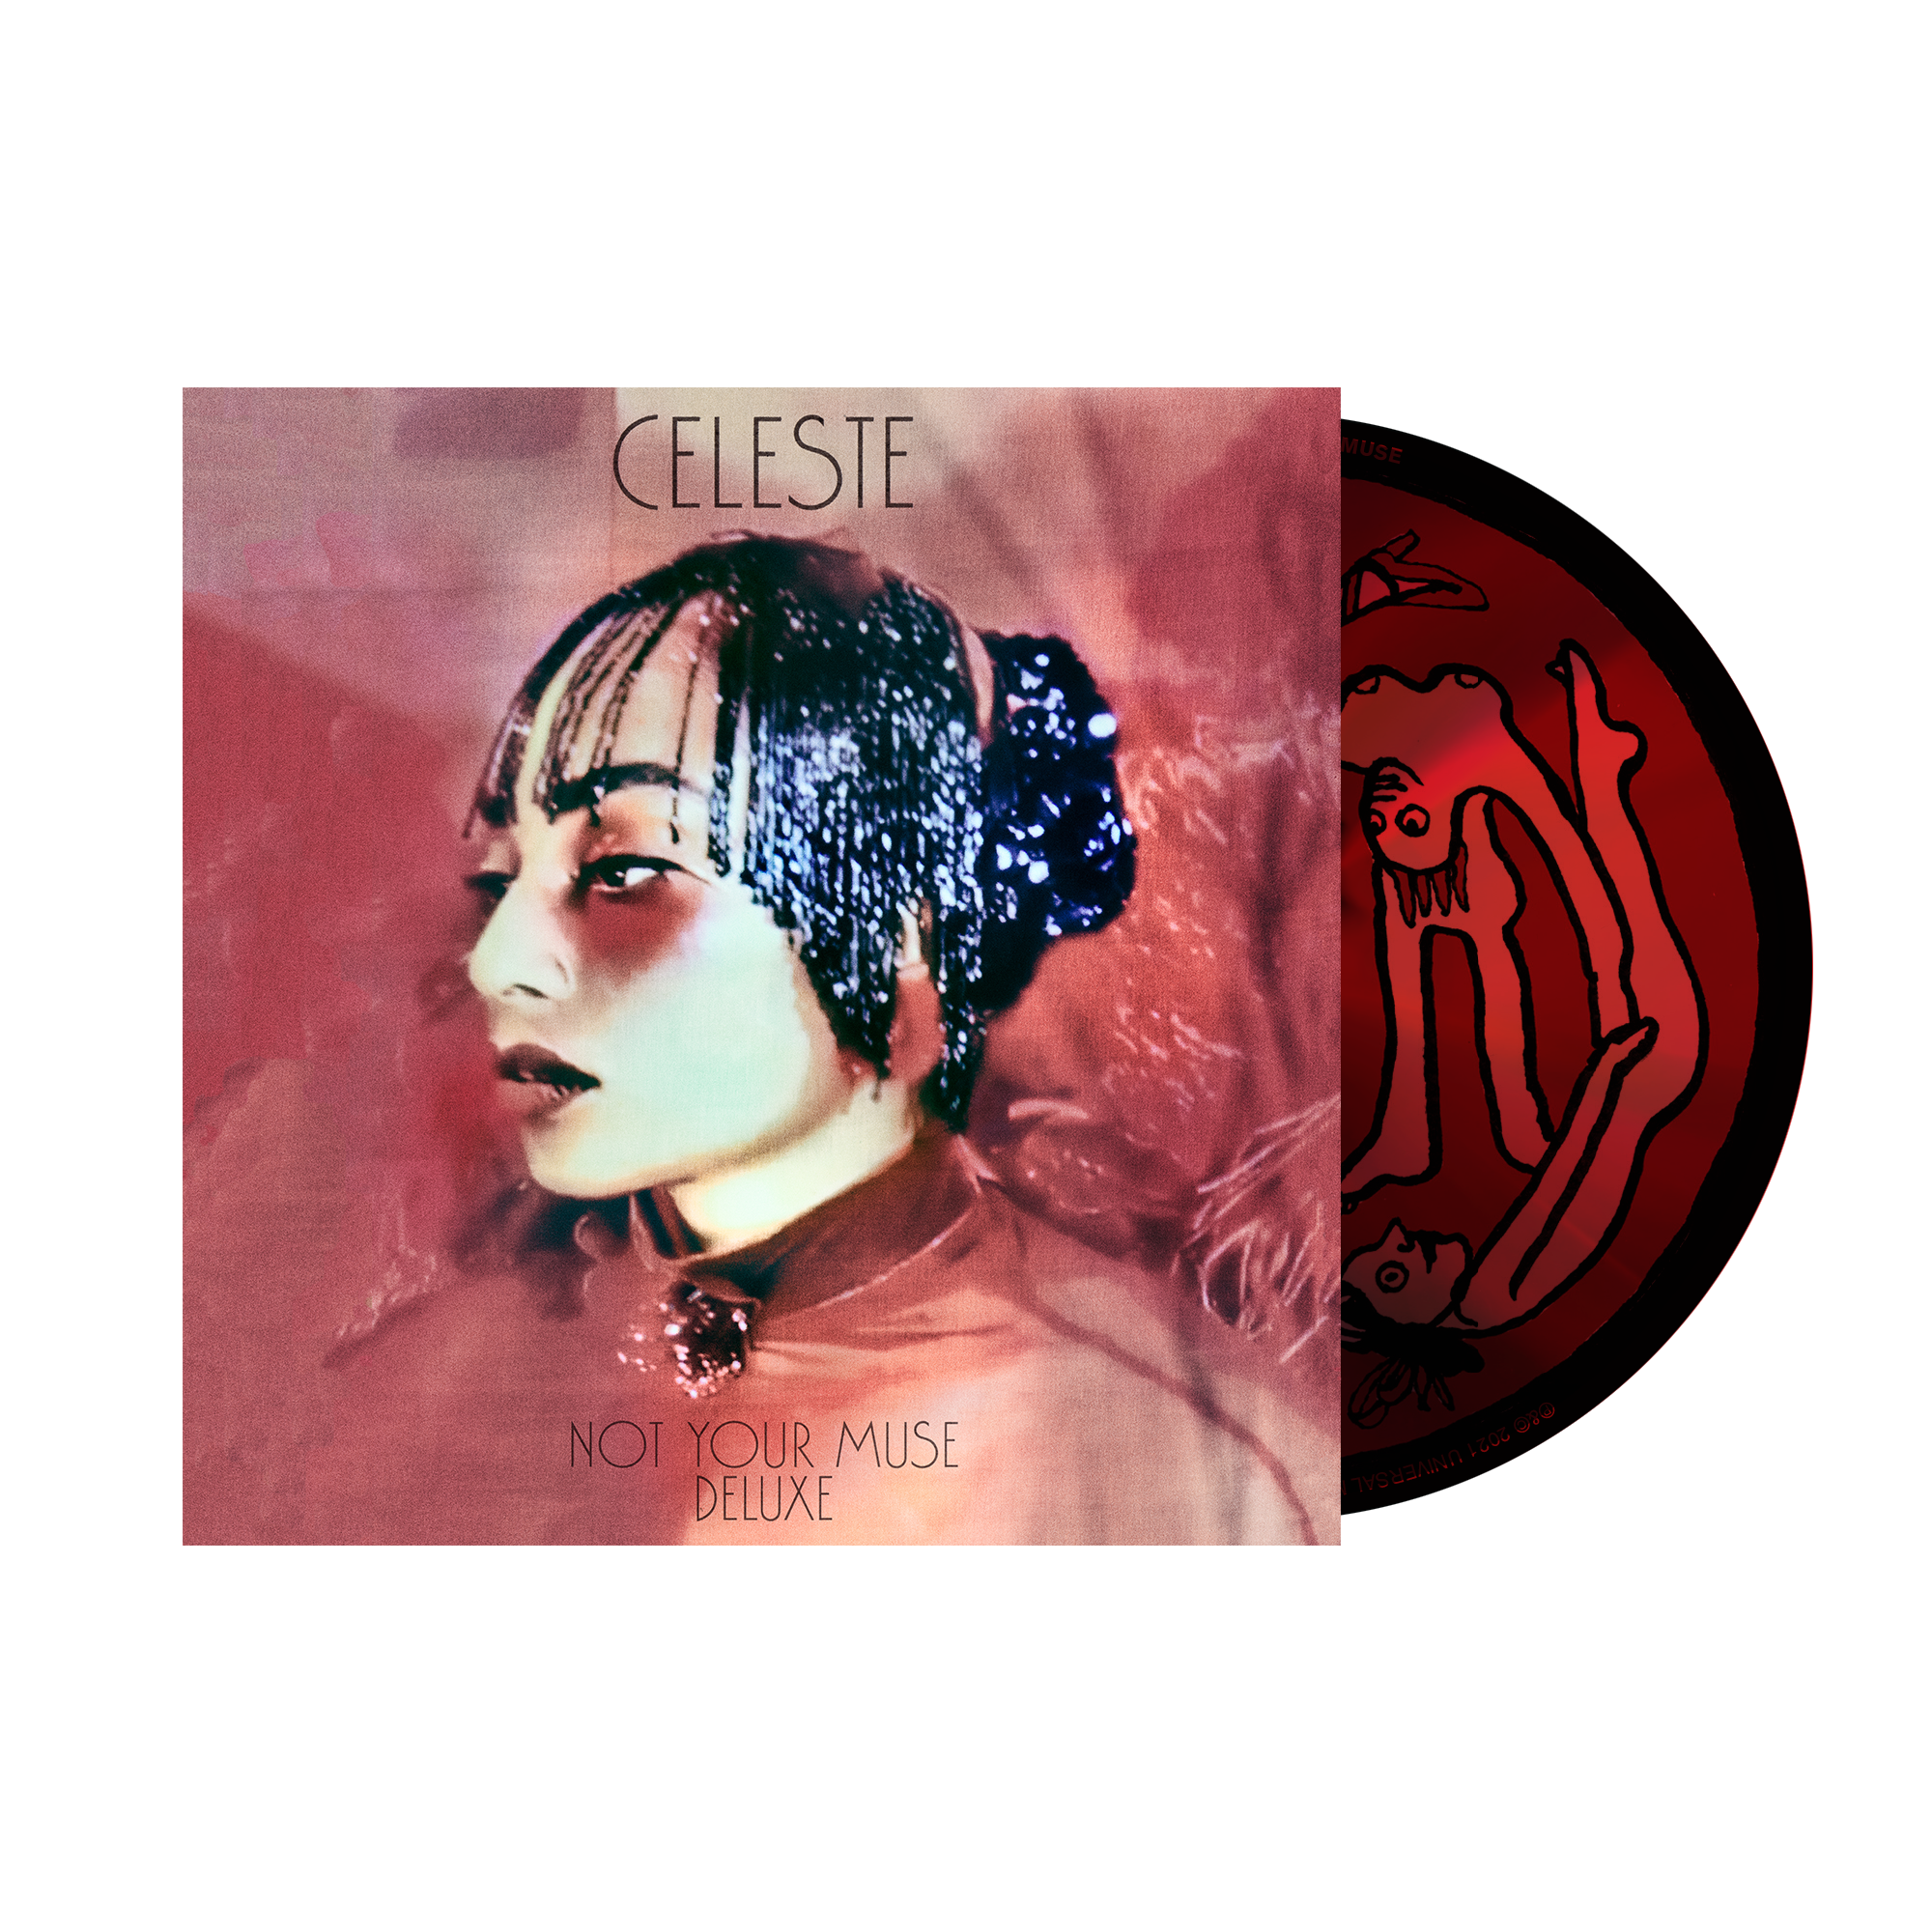 Celeste - Not Your Muse Alternative Cover Deluxe CD